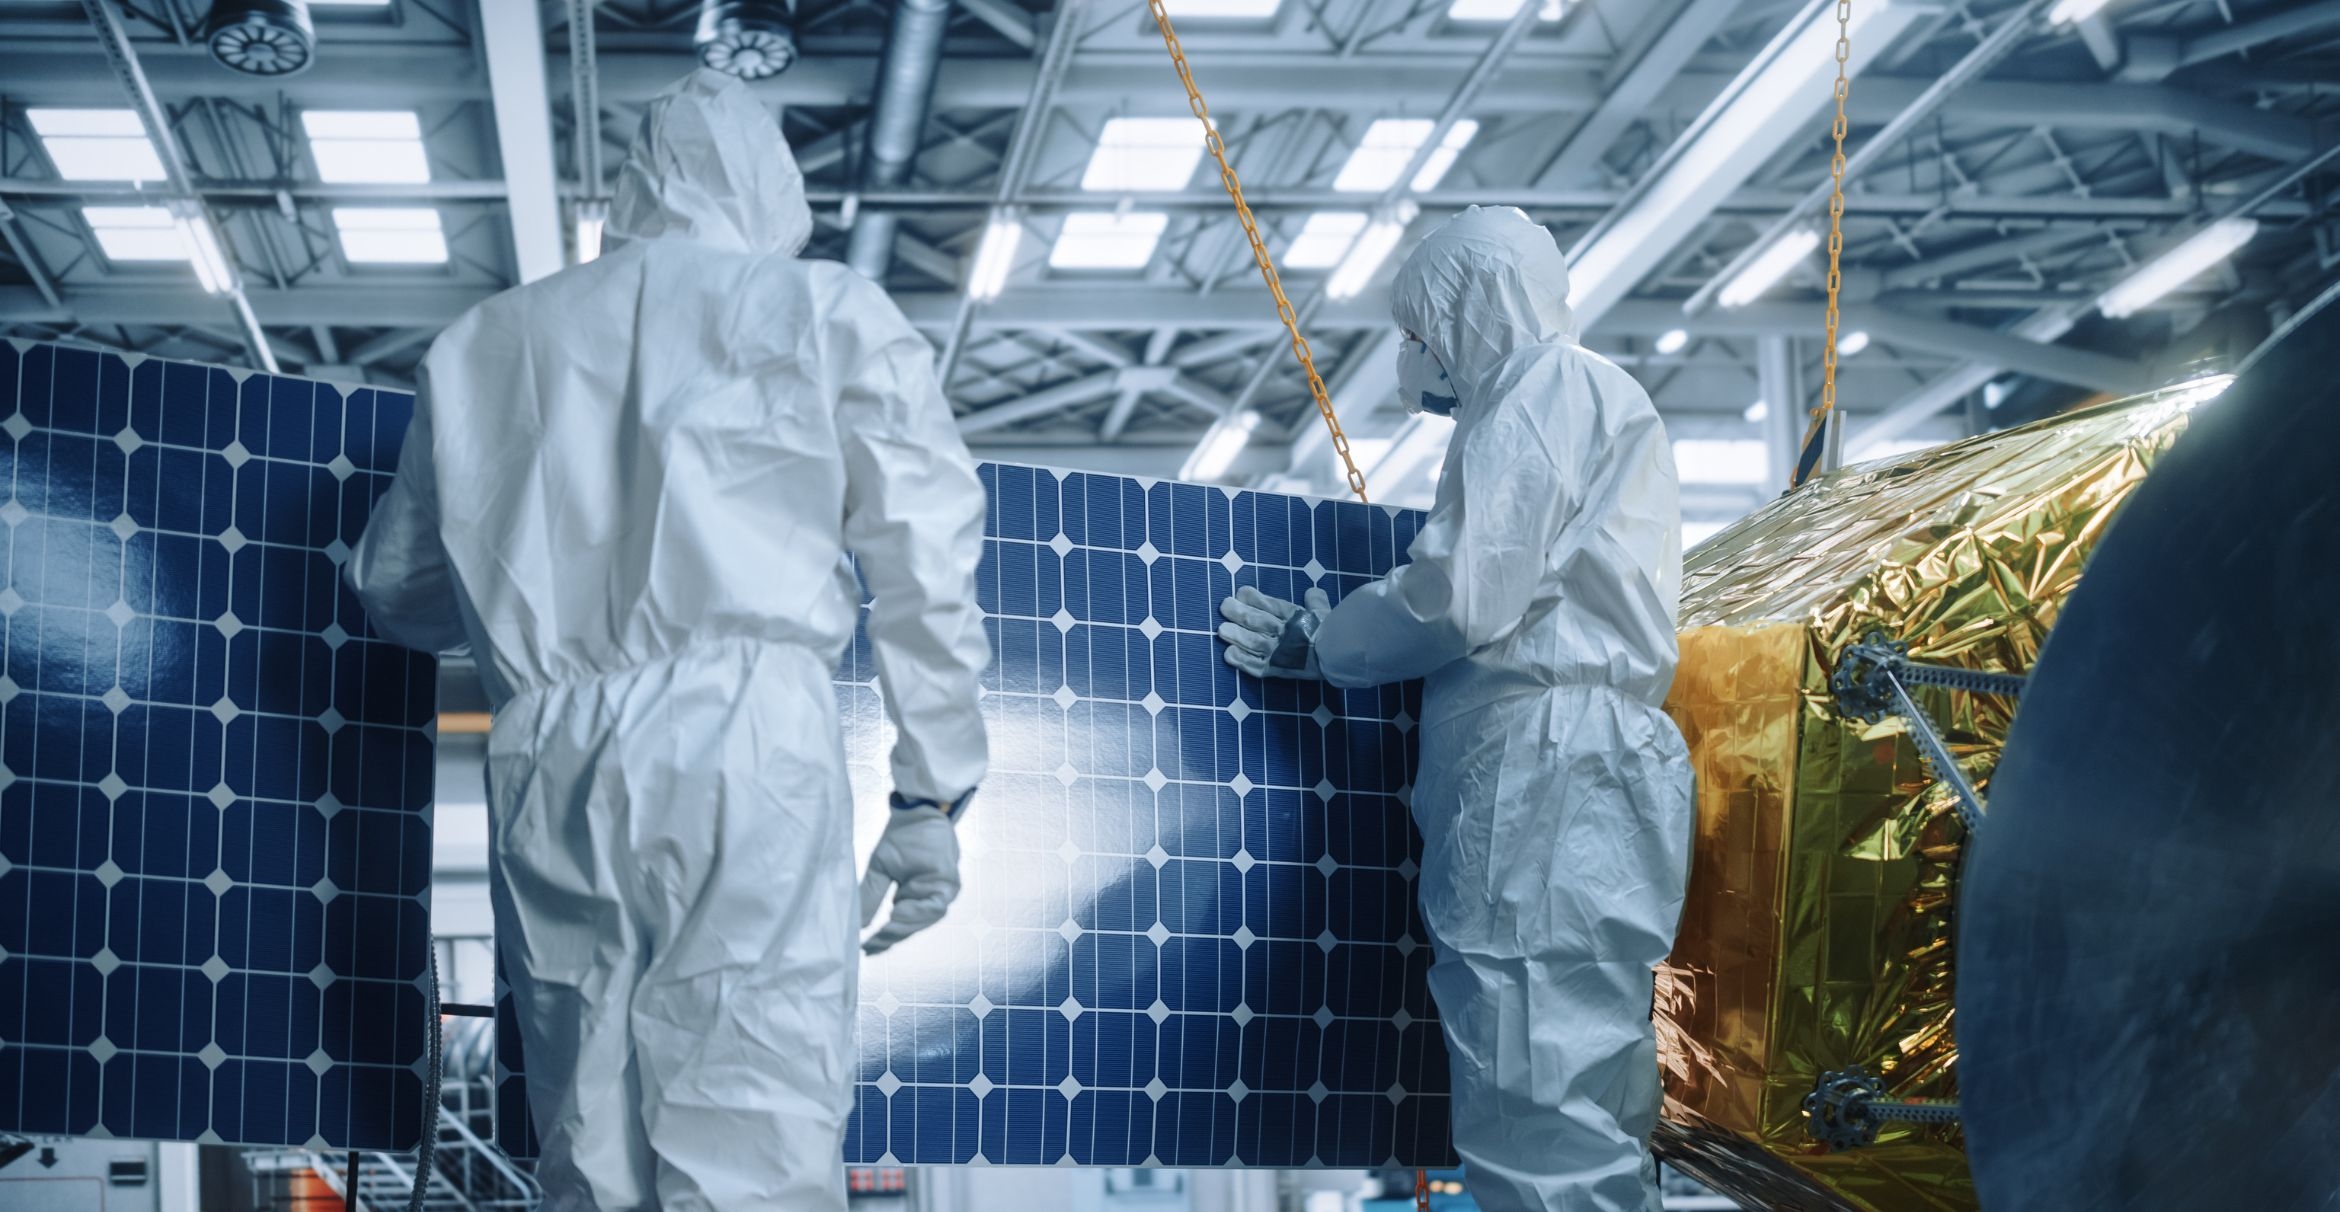 Two workers in white coveralls and masks examine solar cells in a cleanroom.